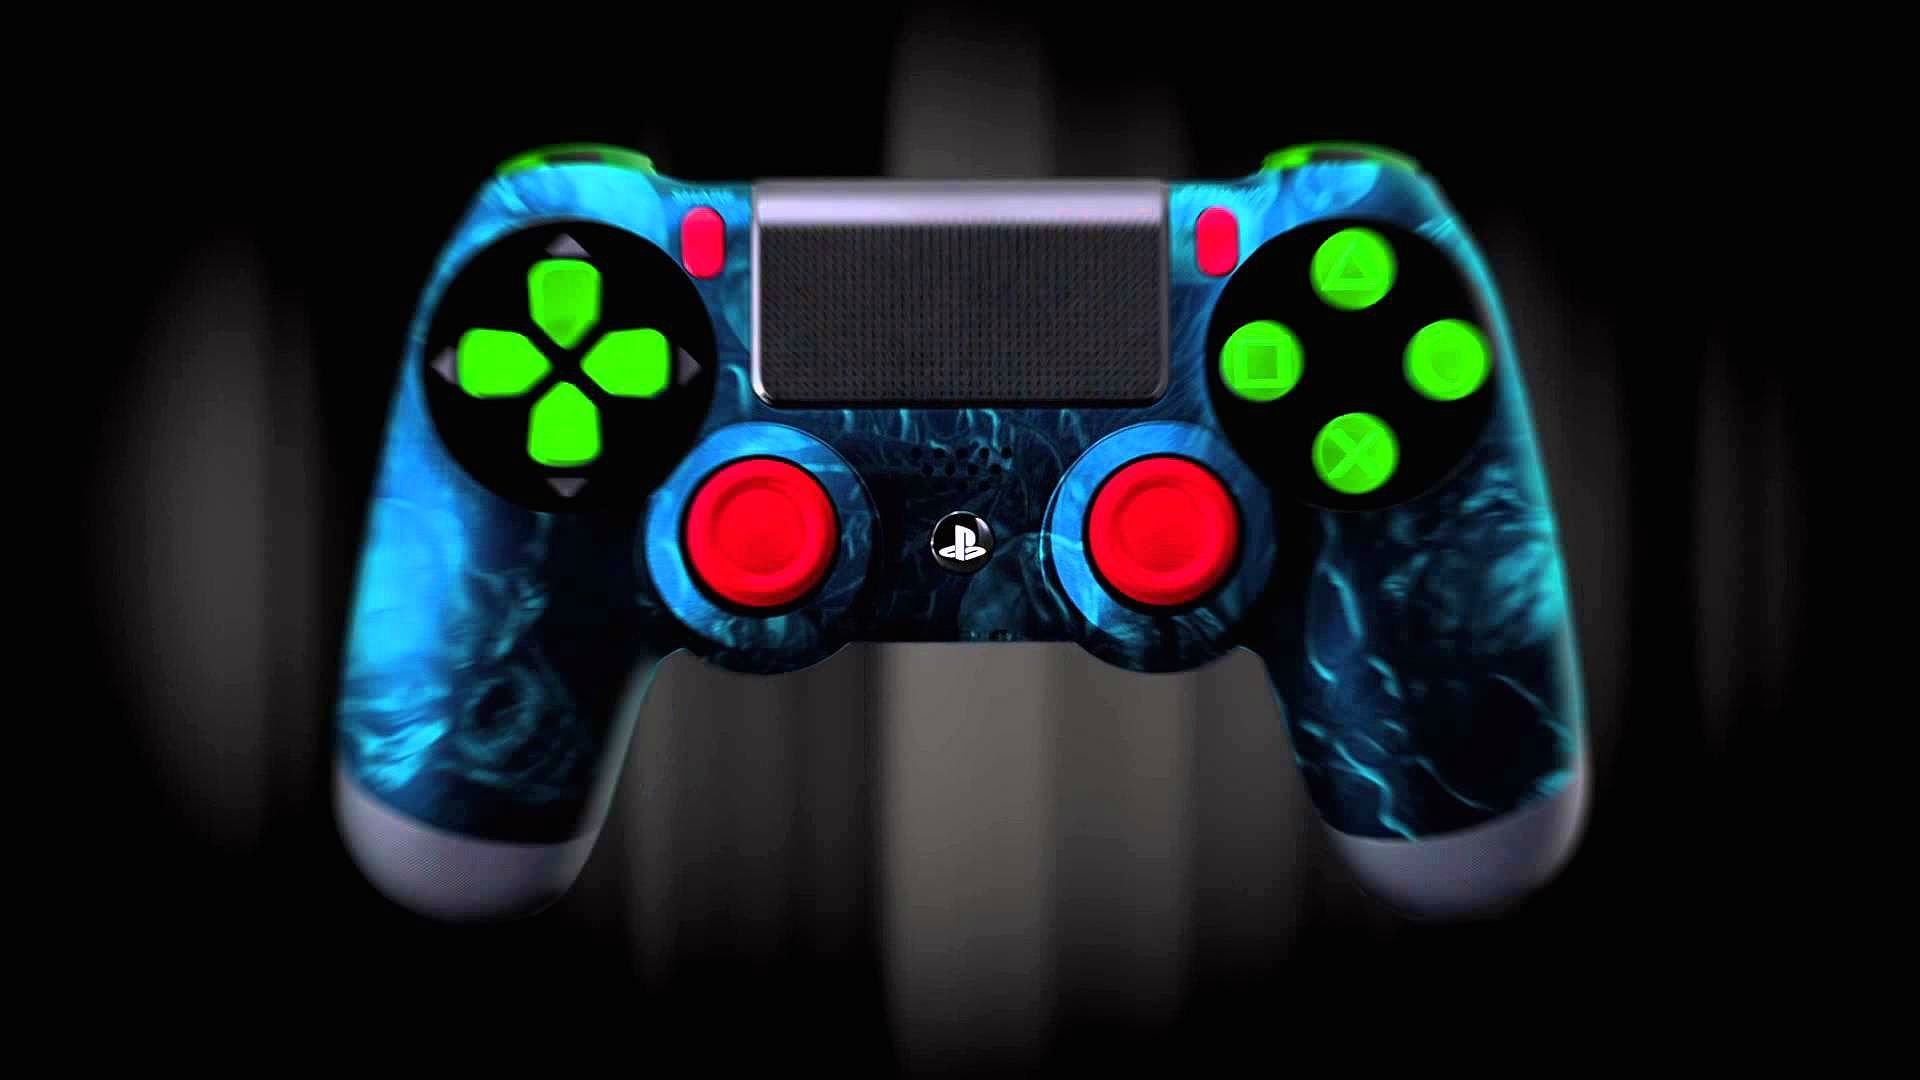 ps4 wallpaper,game controller,home game console accessory,gadget,joystick,video game accessory